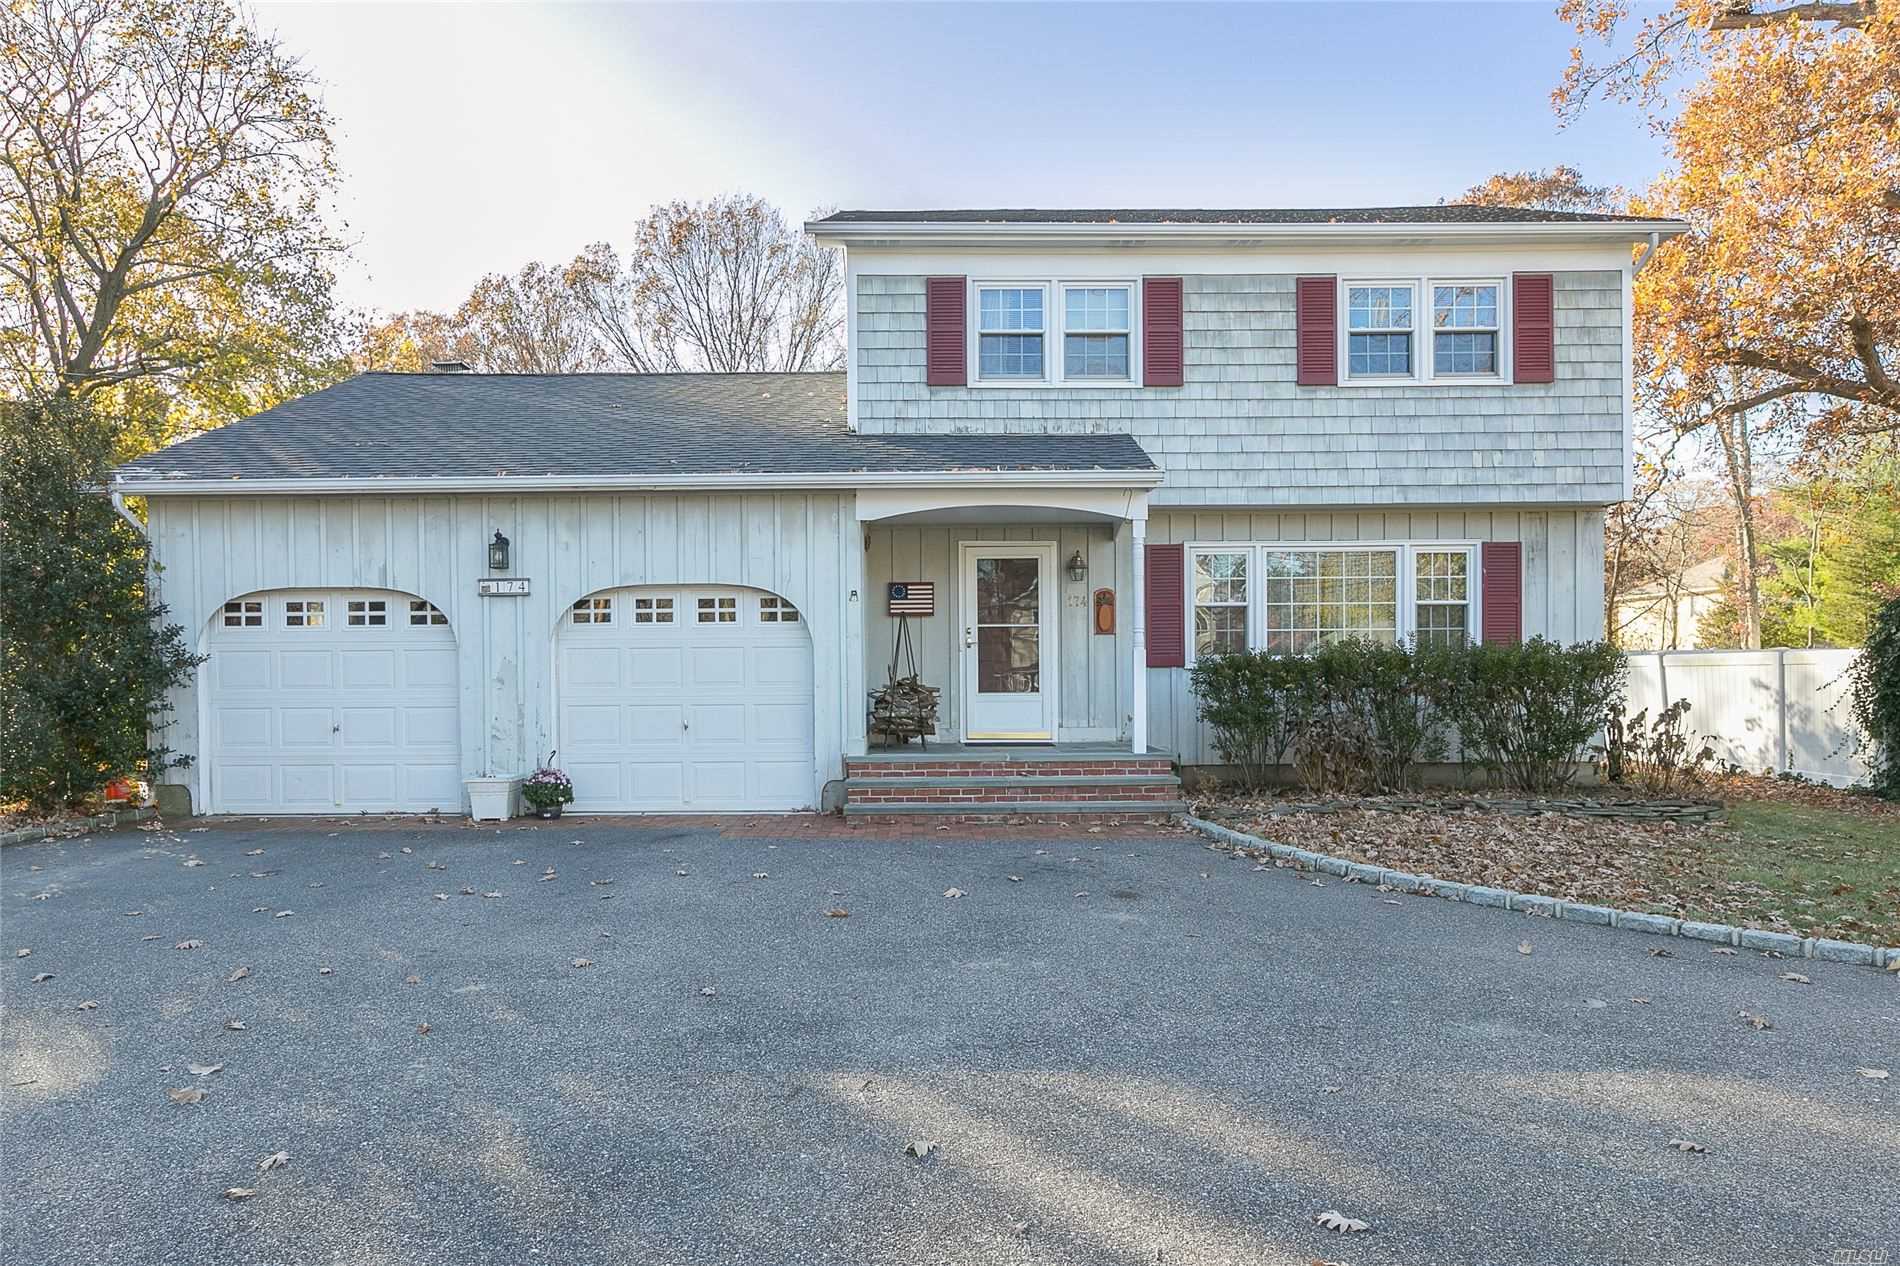 Welcoming Custom Built Colonial on Half Acre. Builder was Glenn Hill Estates. Spacious Principal Rooms, Den with Wood Burning Fireplace, Wood Floors Throughout, New Roof, New Windows, 2 Car Garage. Flat and Usable Half Acre is Ideal for Quiet Family Gatherings or Gracious Entertaining.